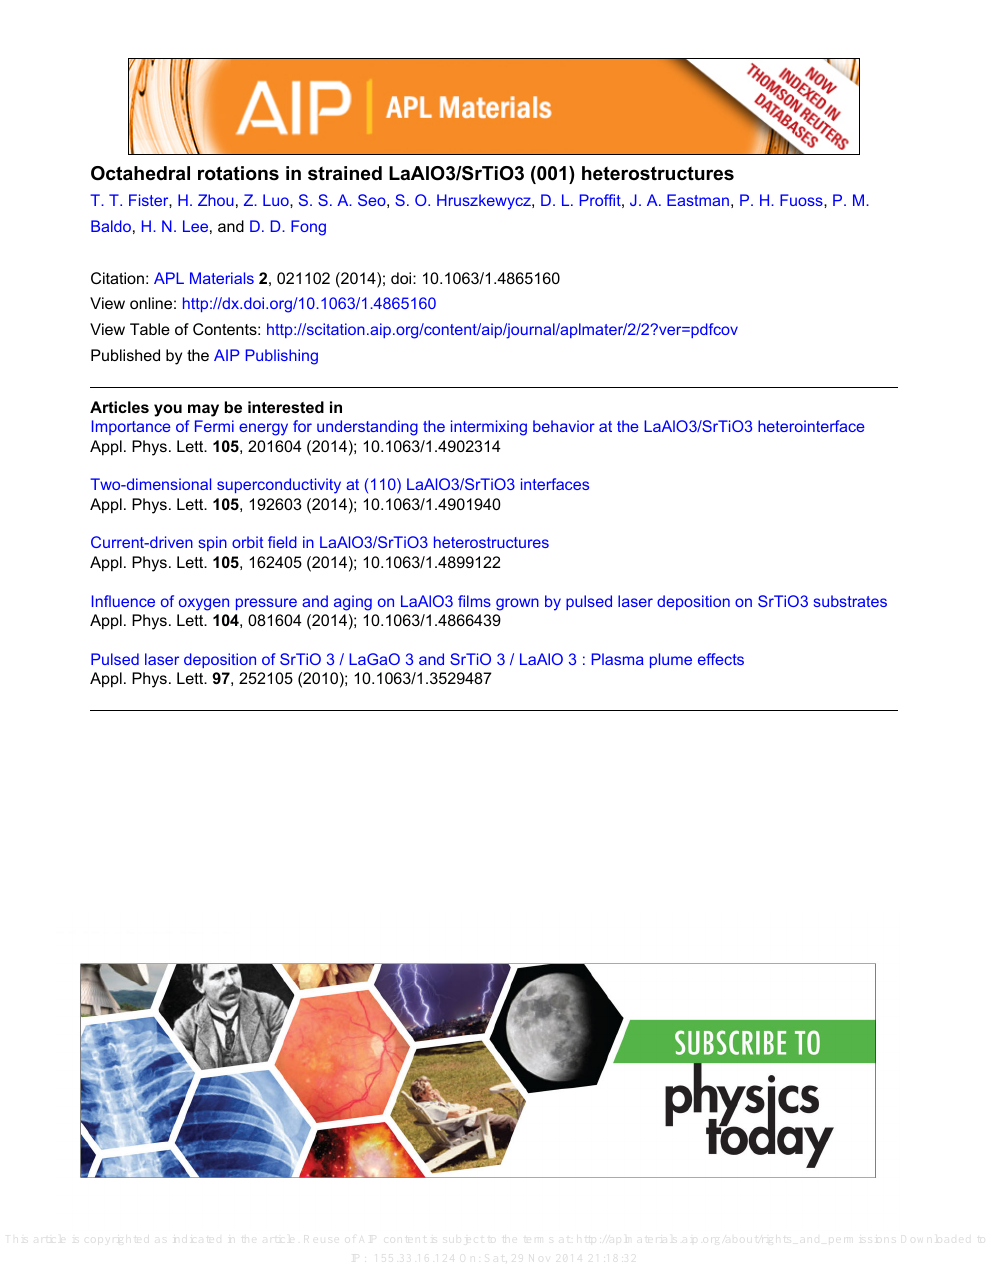 Octahedral Rotations In Strained Laalo3 Srtio3 001 Heterostructures Topic Of Research Paper In Nano Technology Download Scholarly Article Pdf And Read For Free On Cyberleninka Open Science Hub